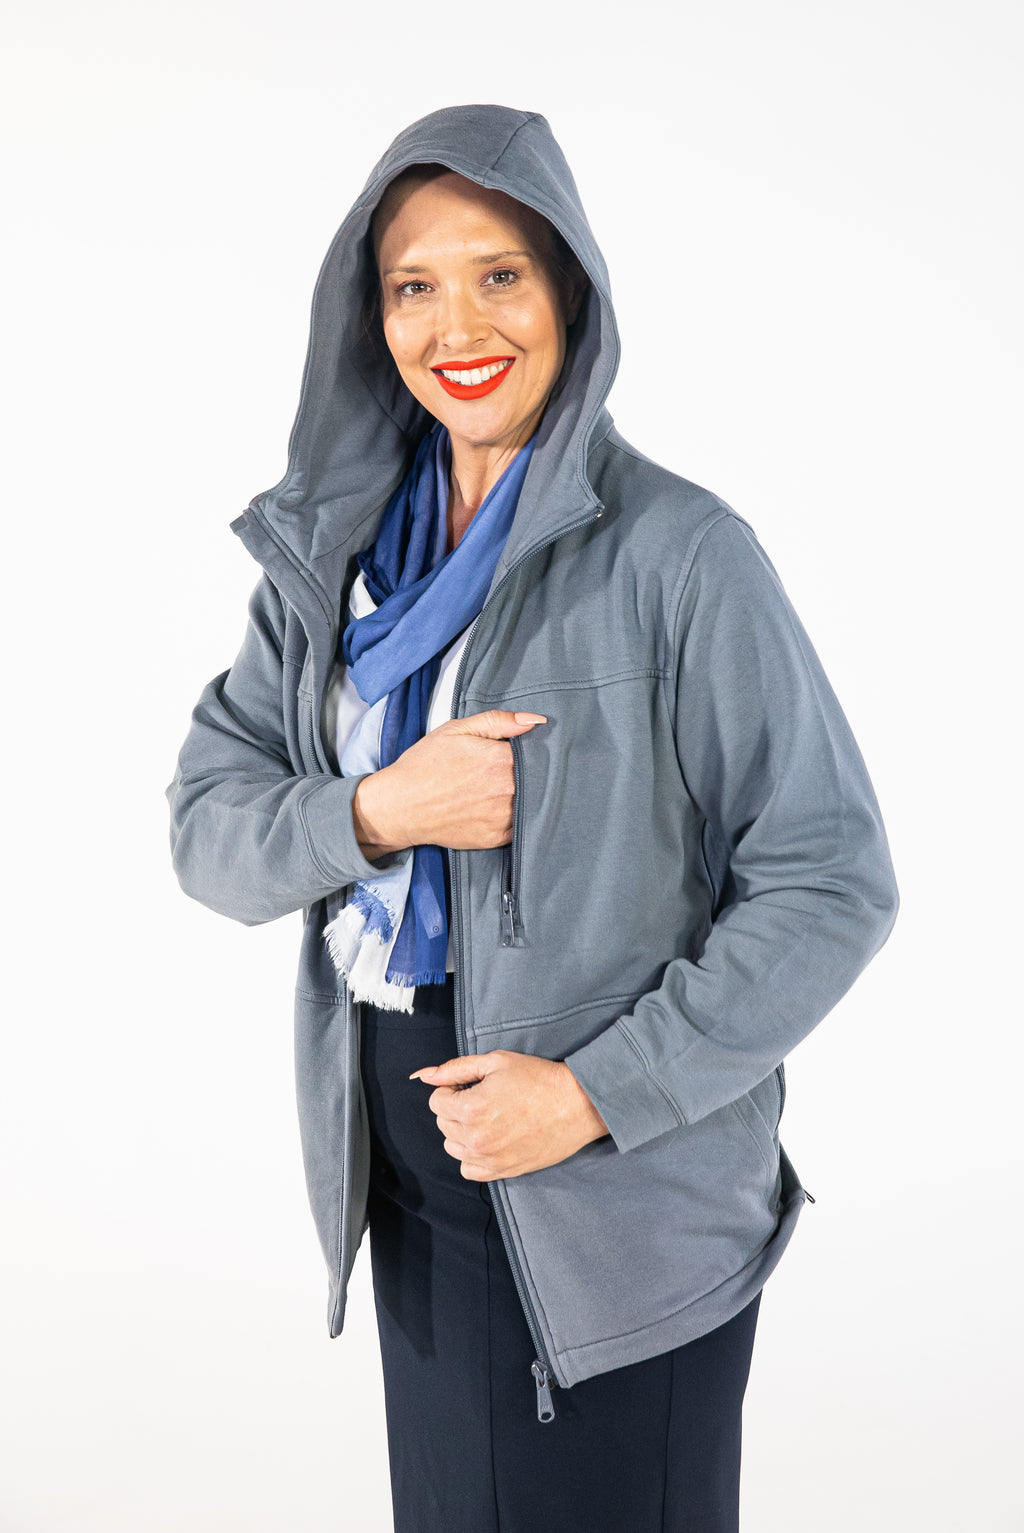 AVION Jacket - uniquely designed jacket created to make sleeping easy on long and short haul flights.   This beautiful bamboo blend is soft and comfortable to wear.  Featuring a concealed support structure for holding your head upright during sleep.  The easy-to-use jacket is just the ticket for an inflight sleep.